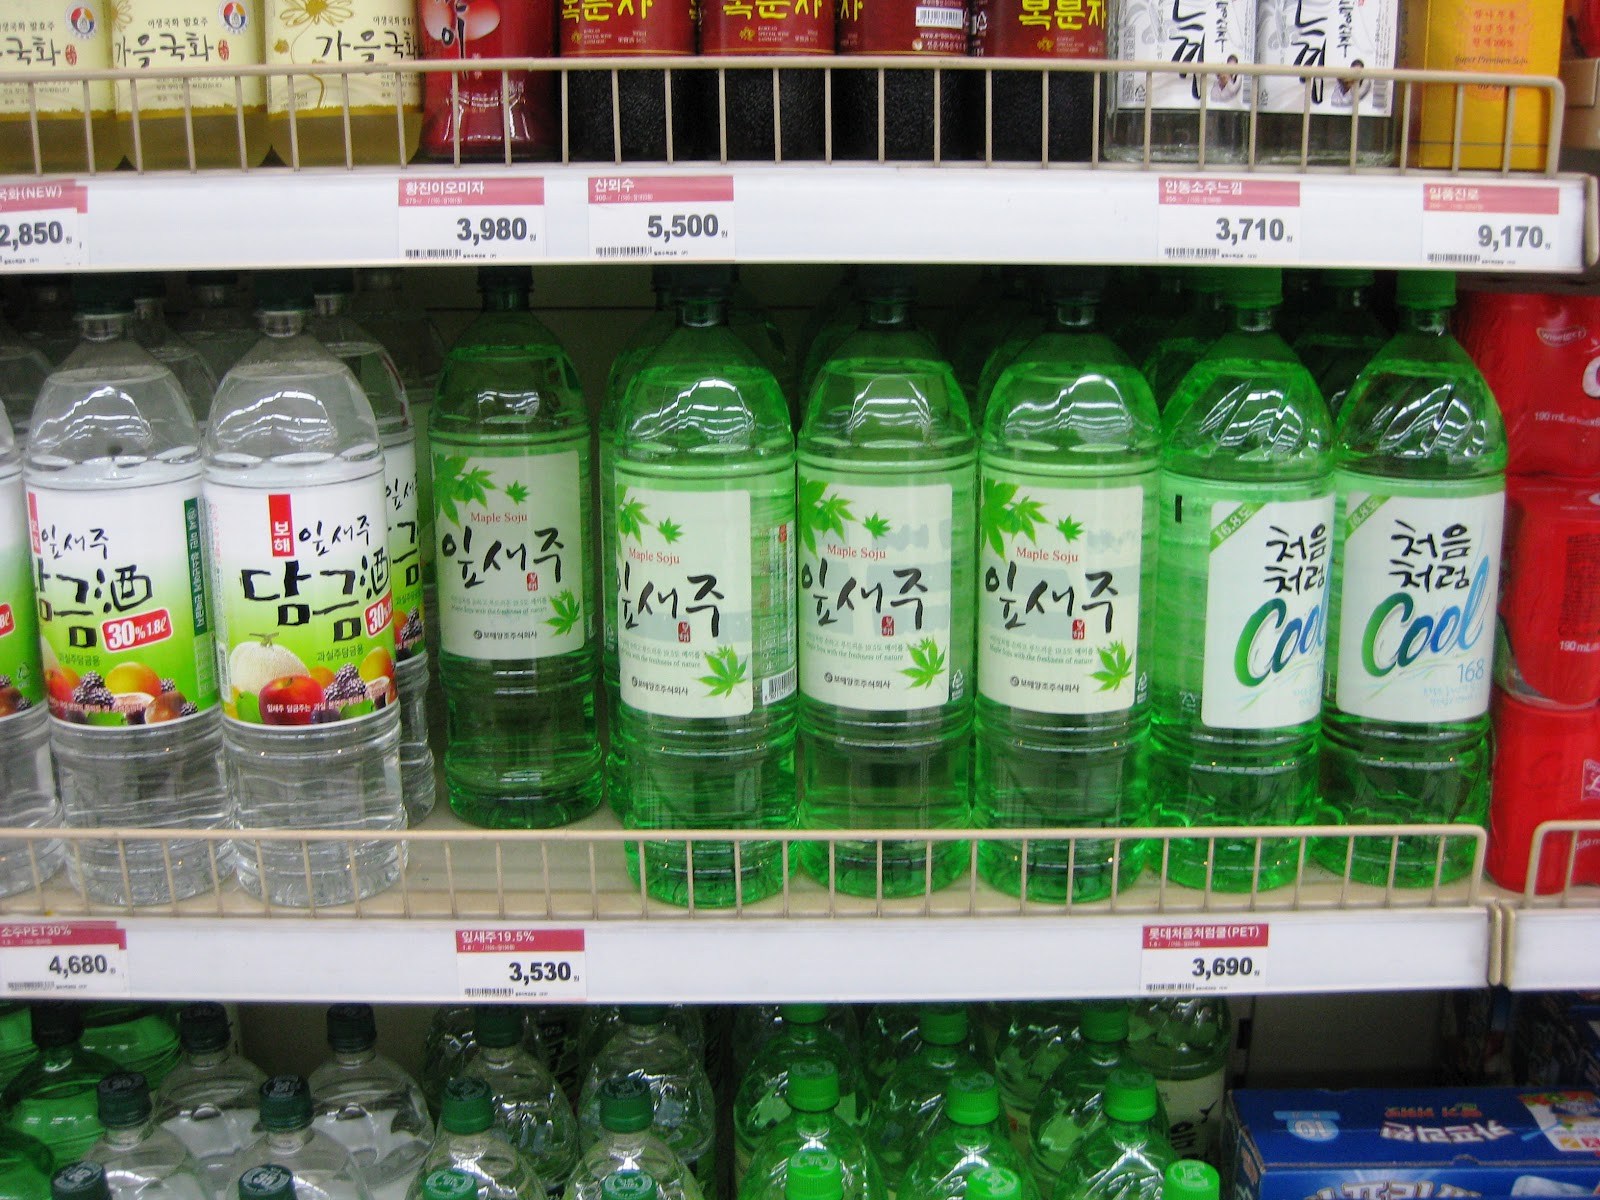 TOP 5 Most Popular Items From Korean Convenience Stores - Koreaboo